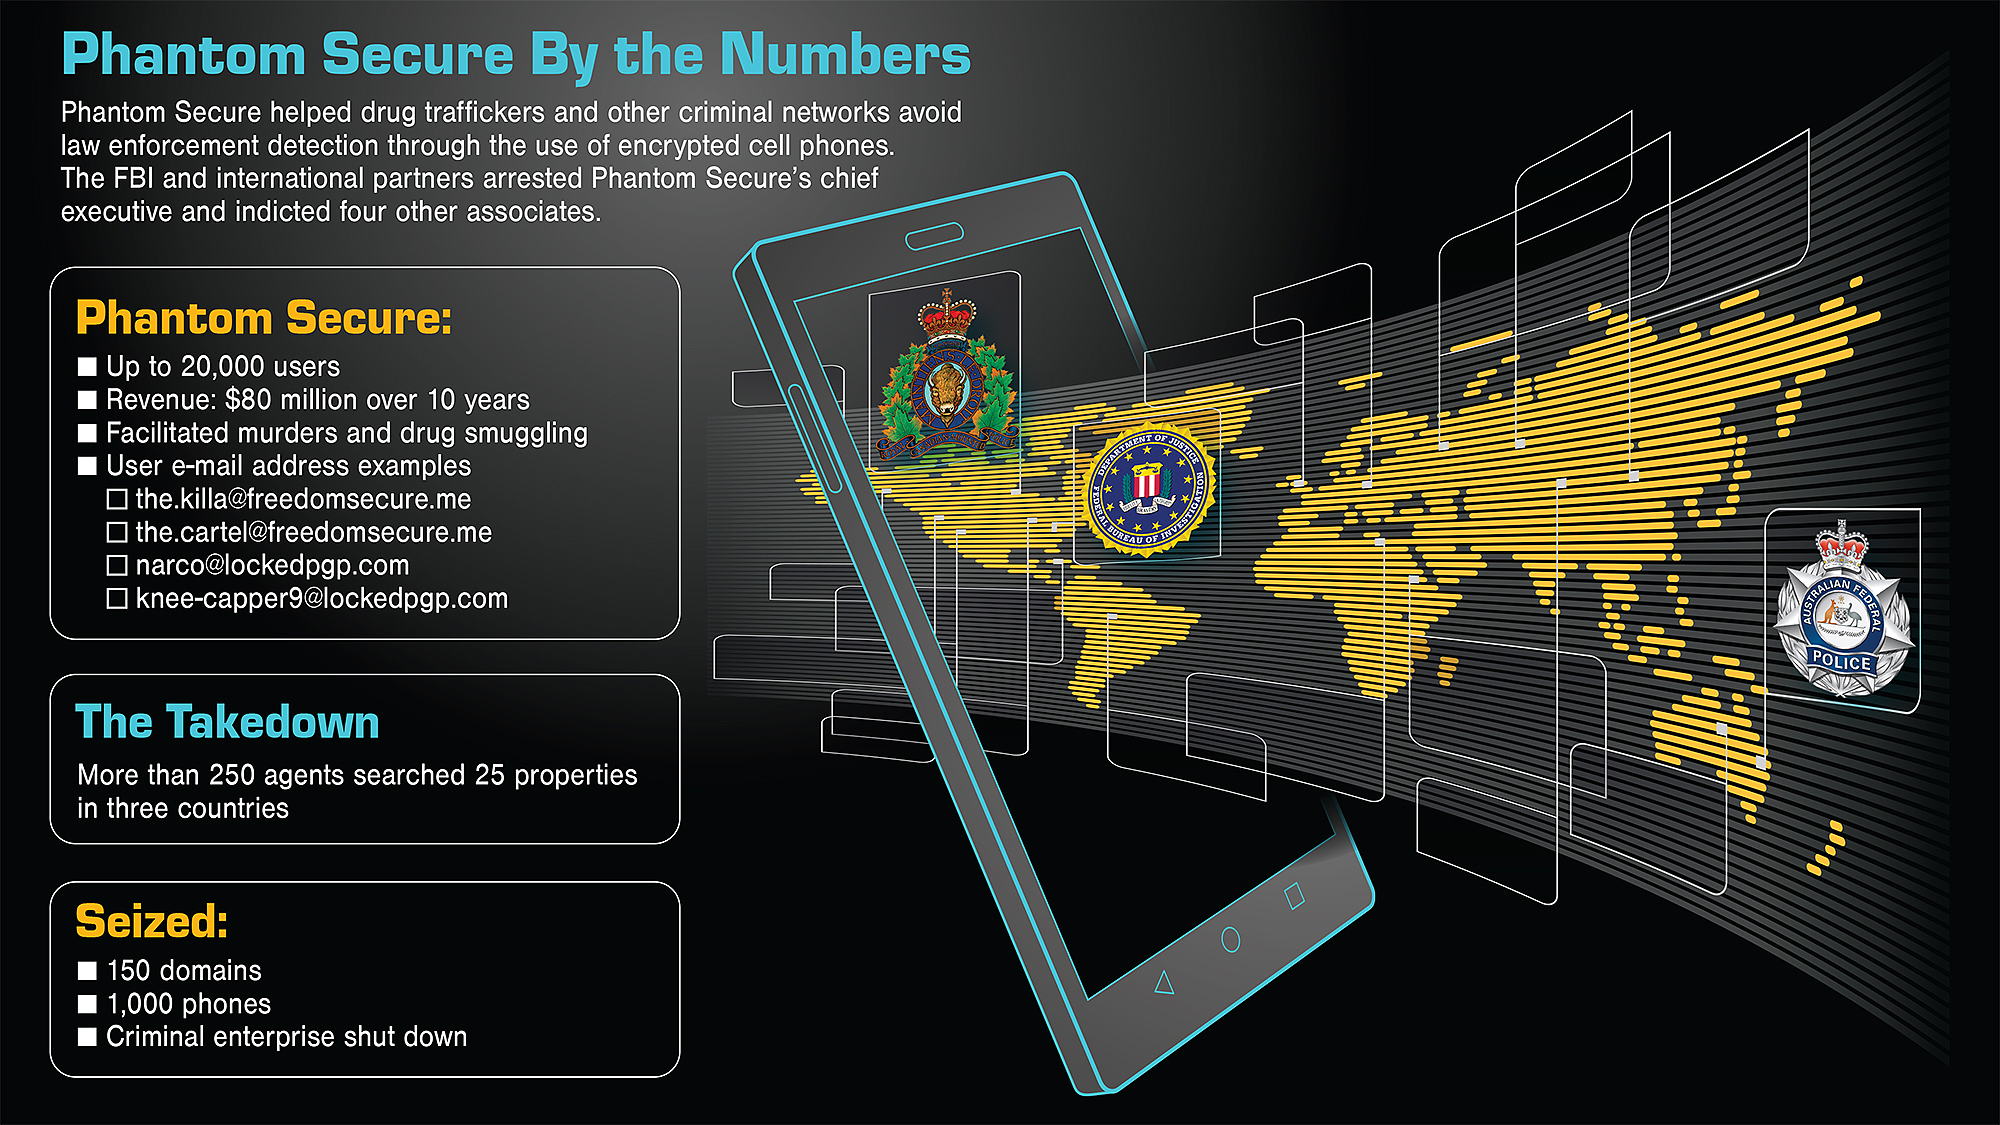 Infographic depicting a cell phone with a globe coming out of it, with the logos of the Royal Canadian Mounted Police, FBI, and Australian Federal Police on the globe.